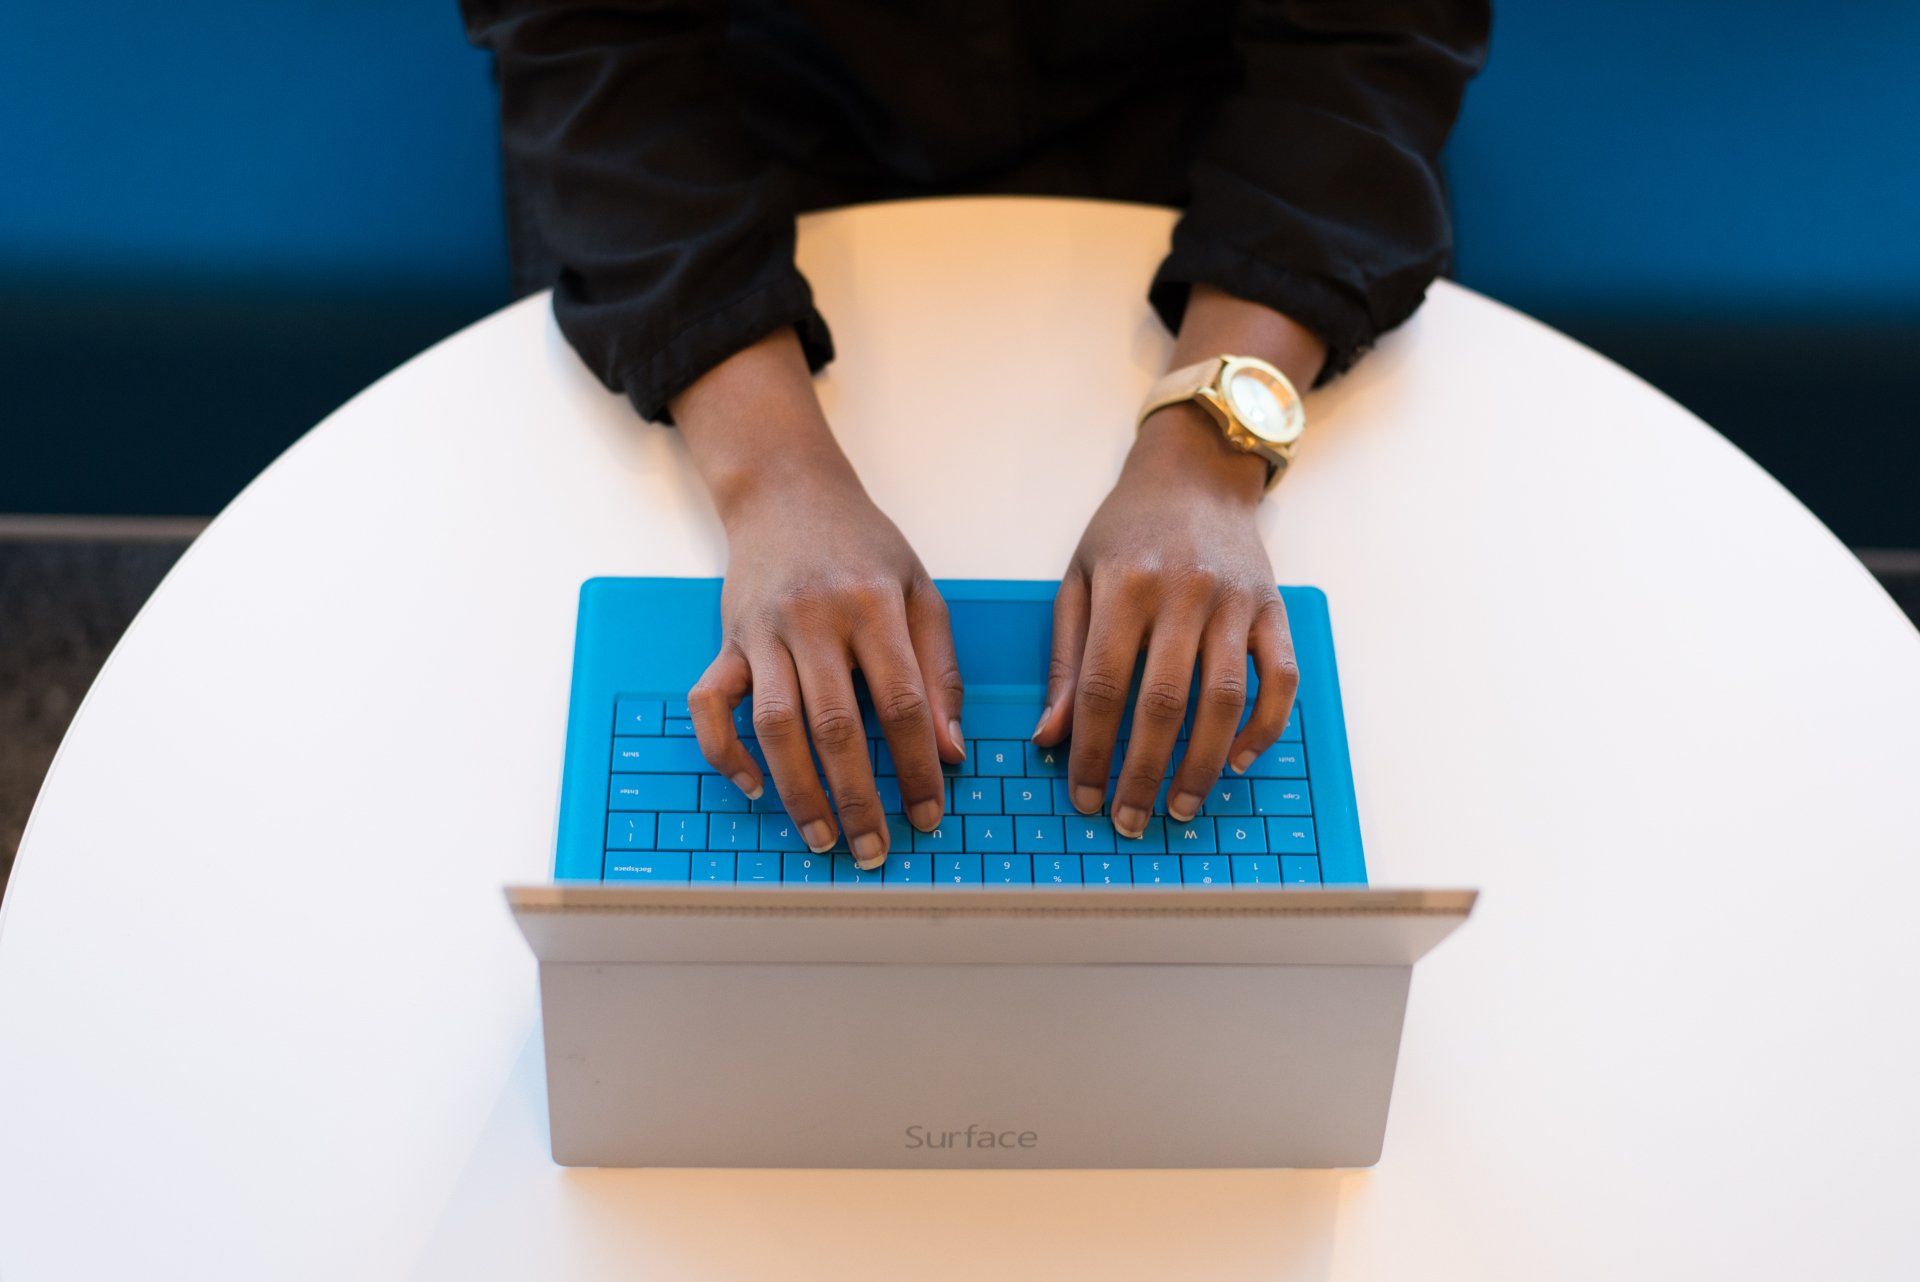 A person is sitting at a table typing on a laptop computer.